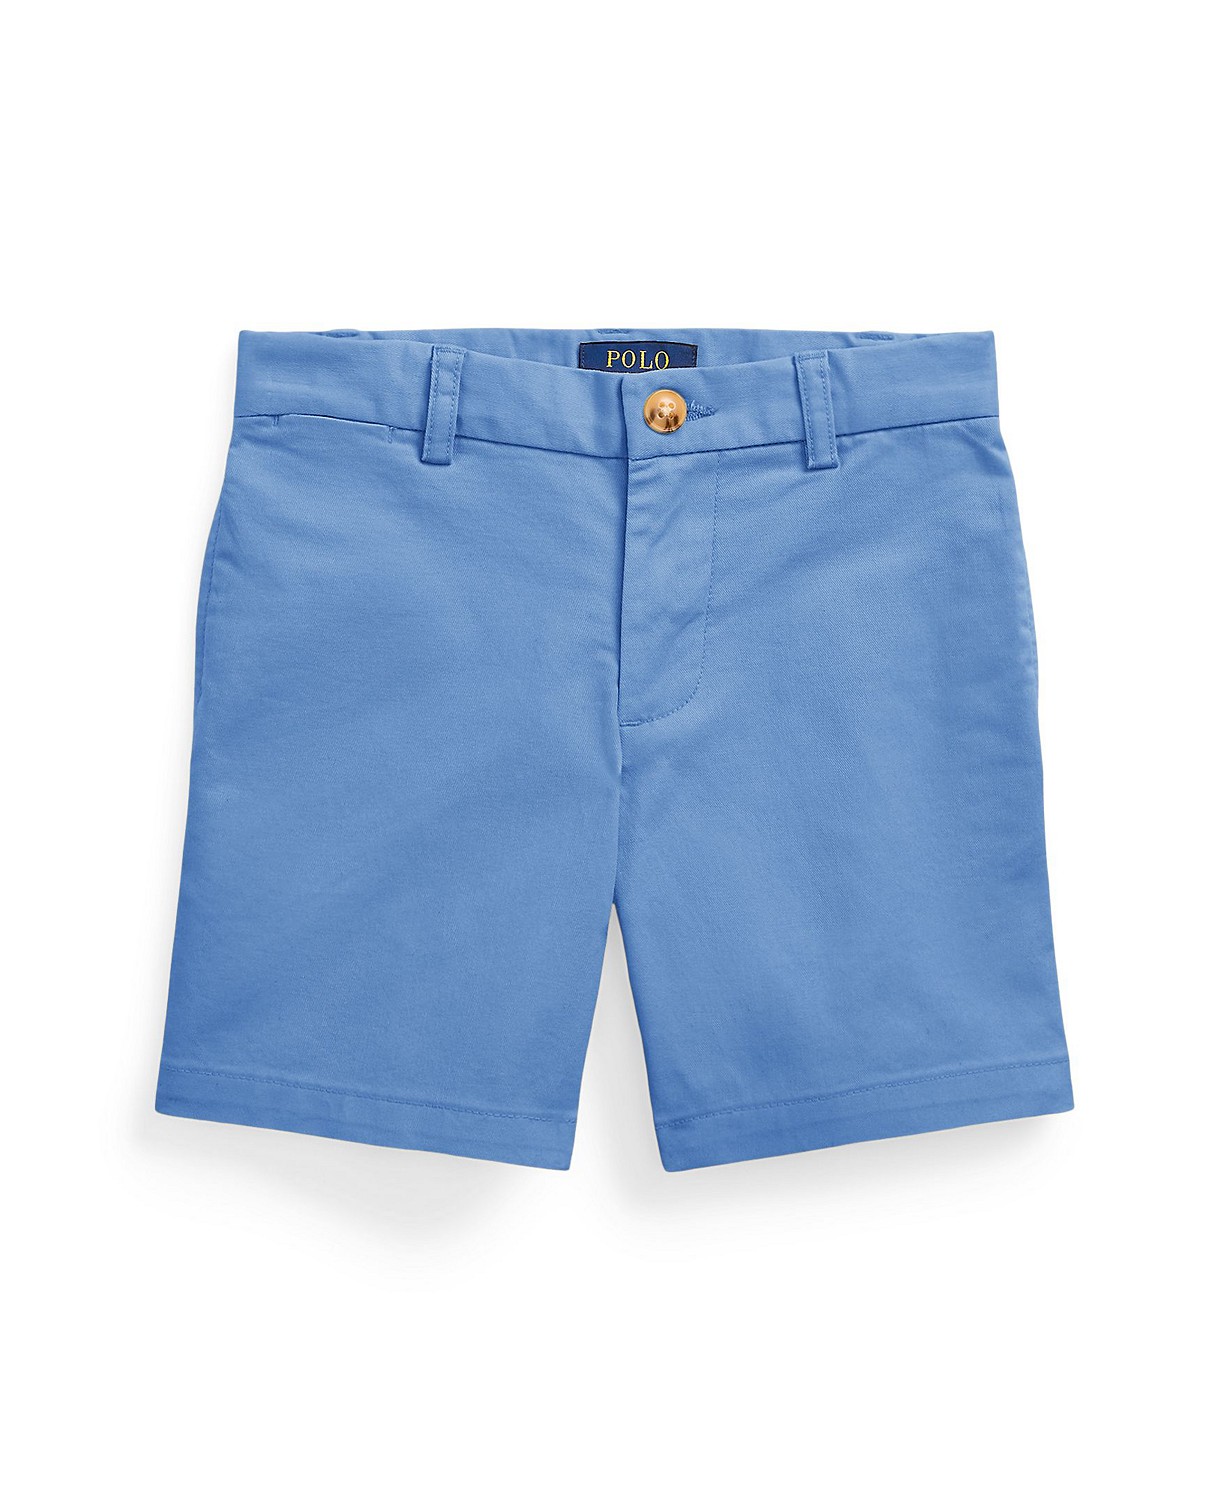 Toddler and Little Boys Straight Fit Flex Abrasion Twill Shorts